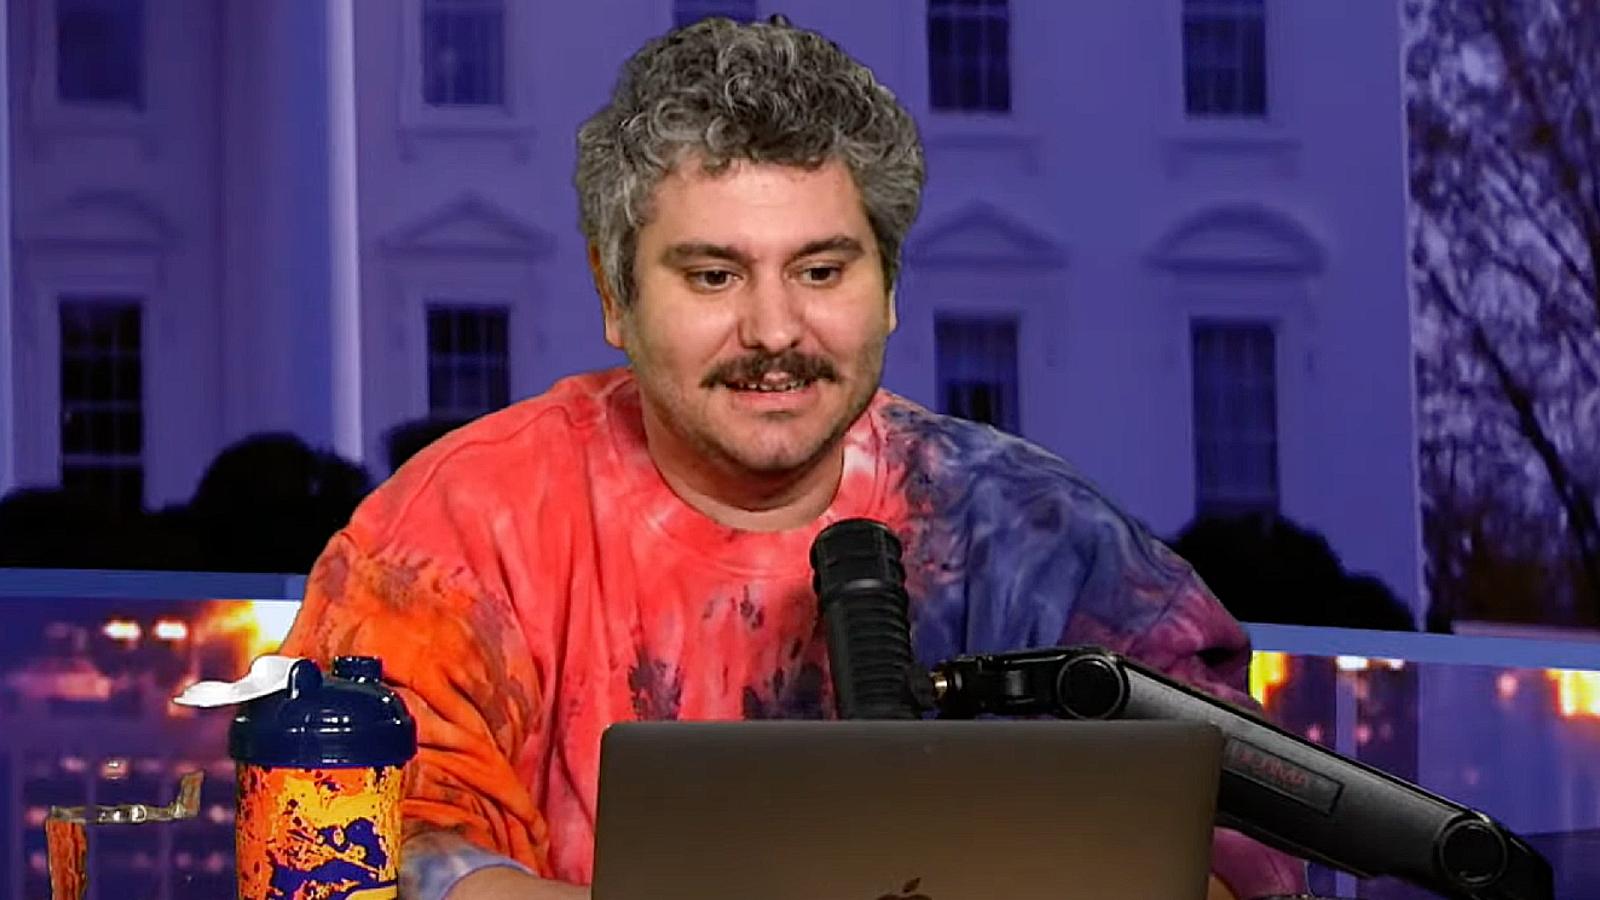 h3h3 ethan klein on leftovers podcast before ban